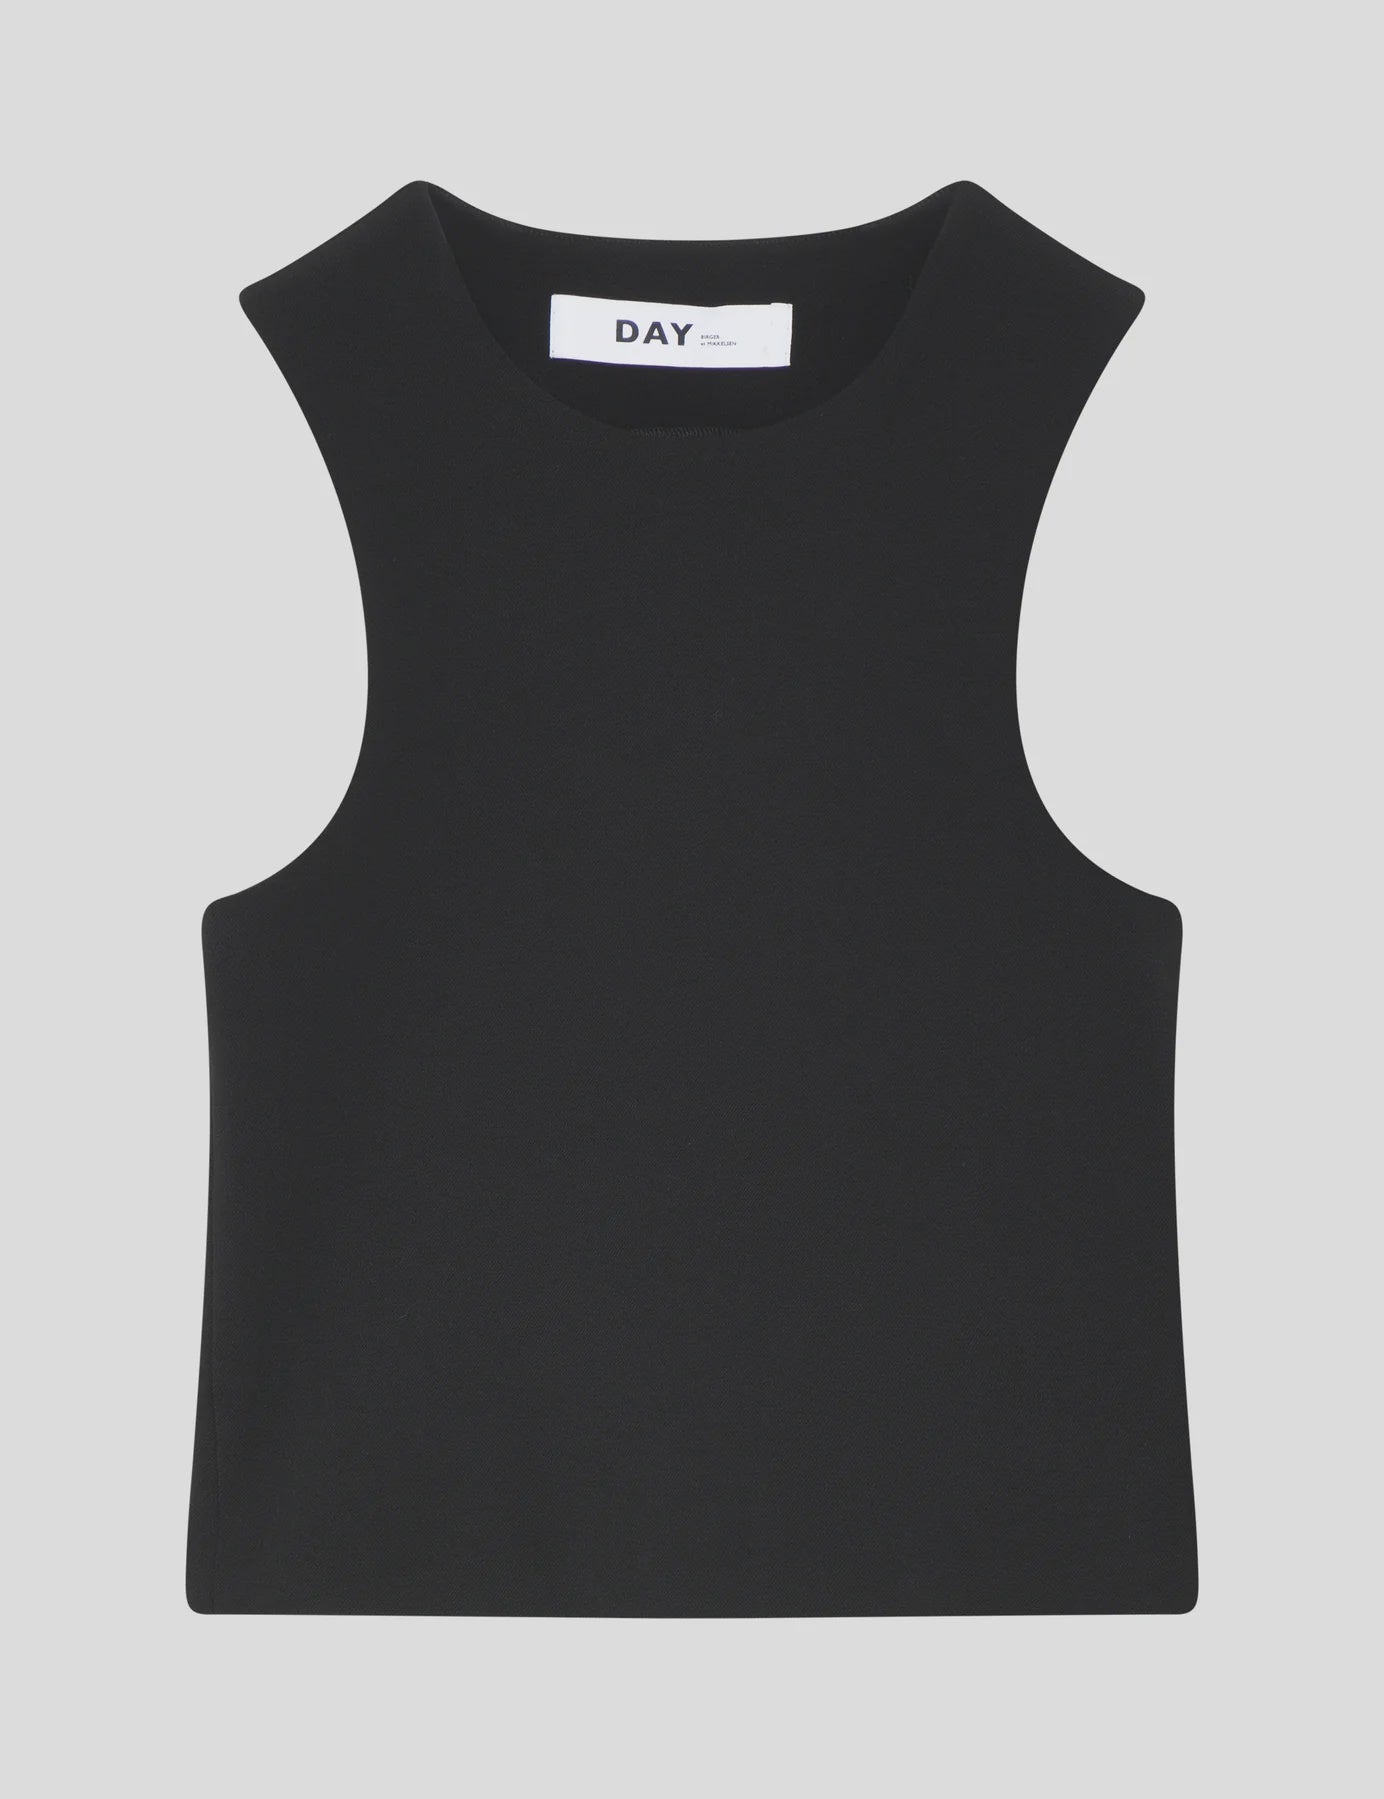 Traci - all day jersey top